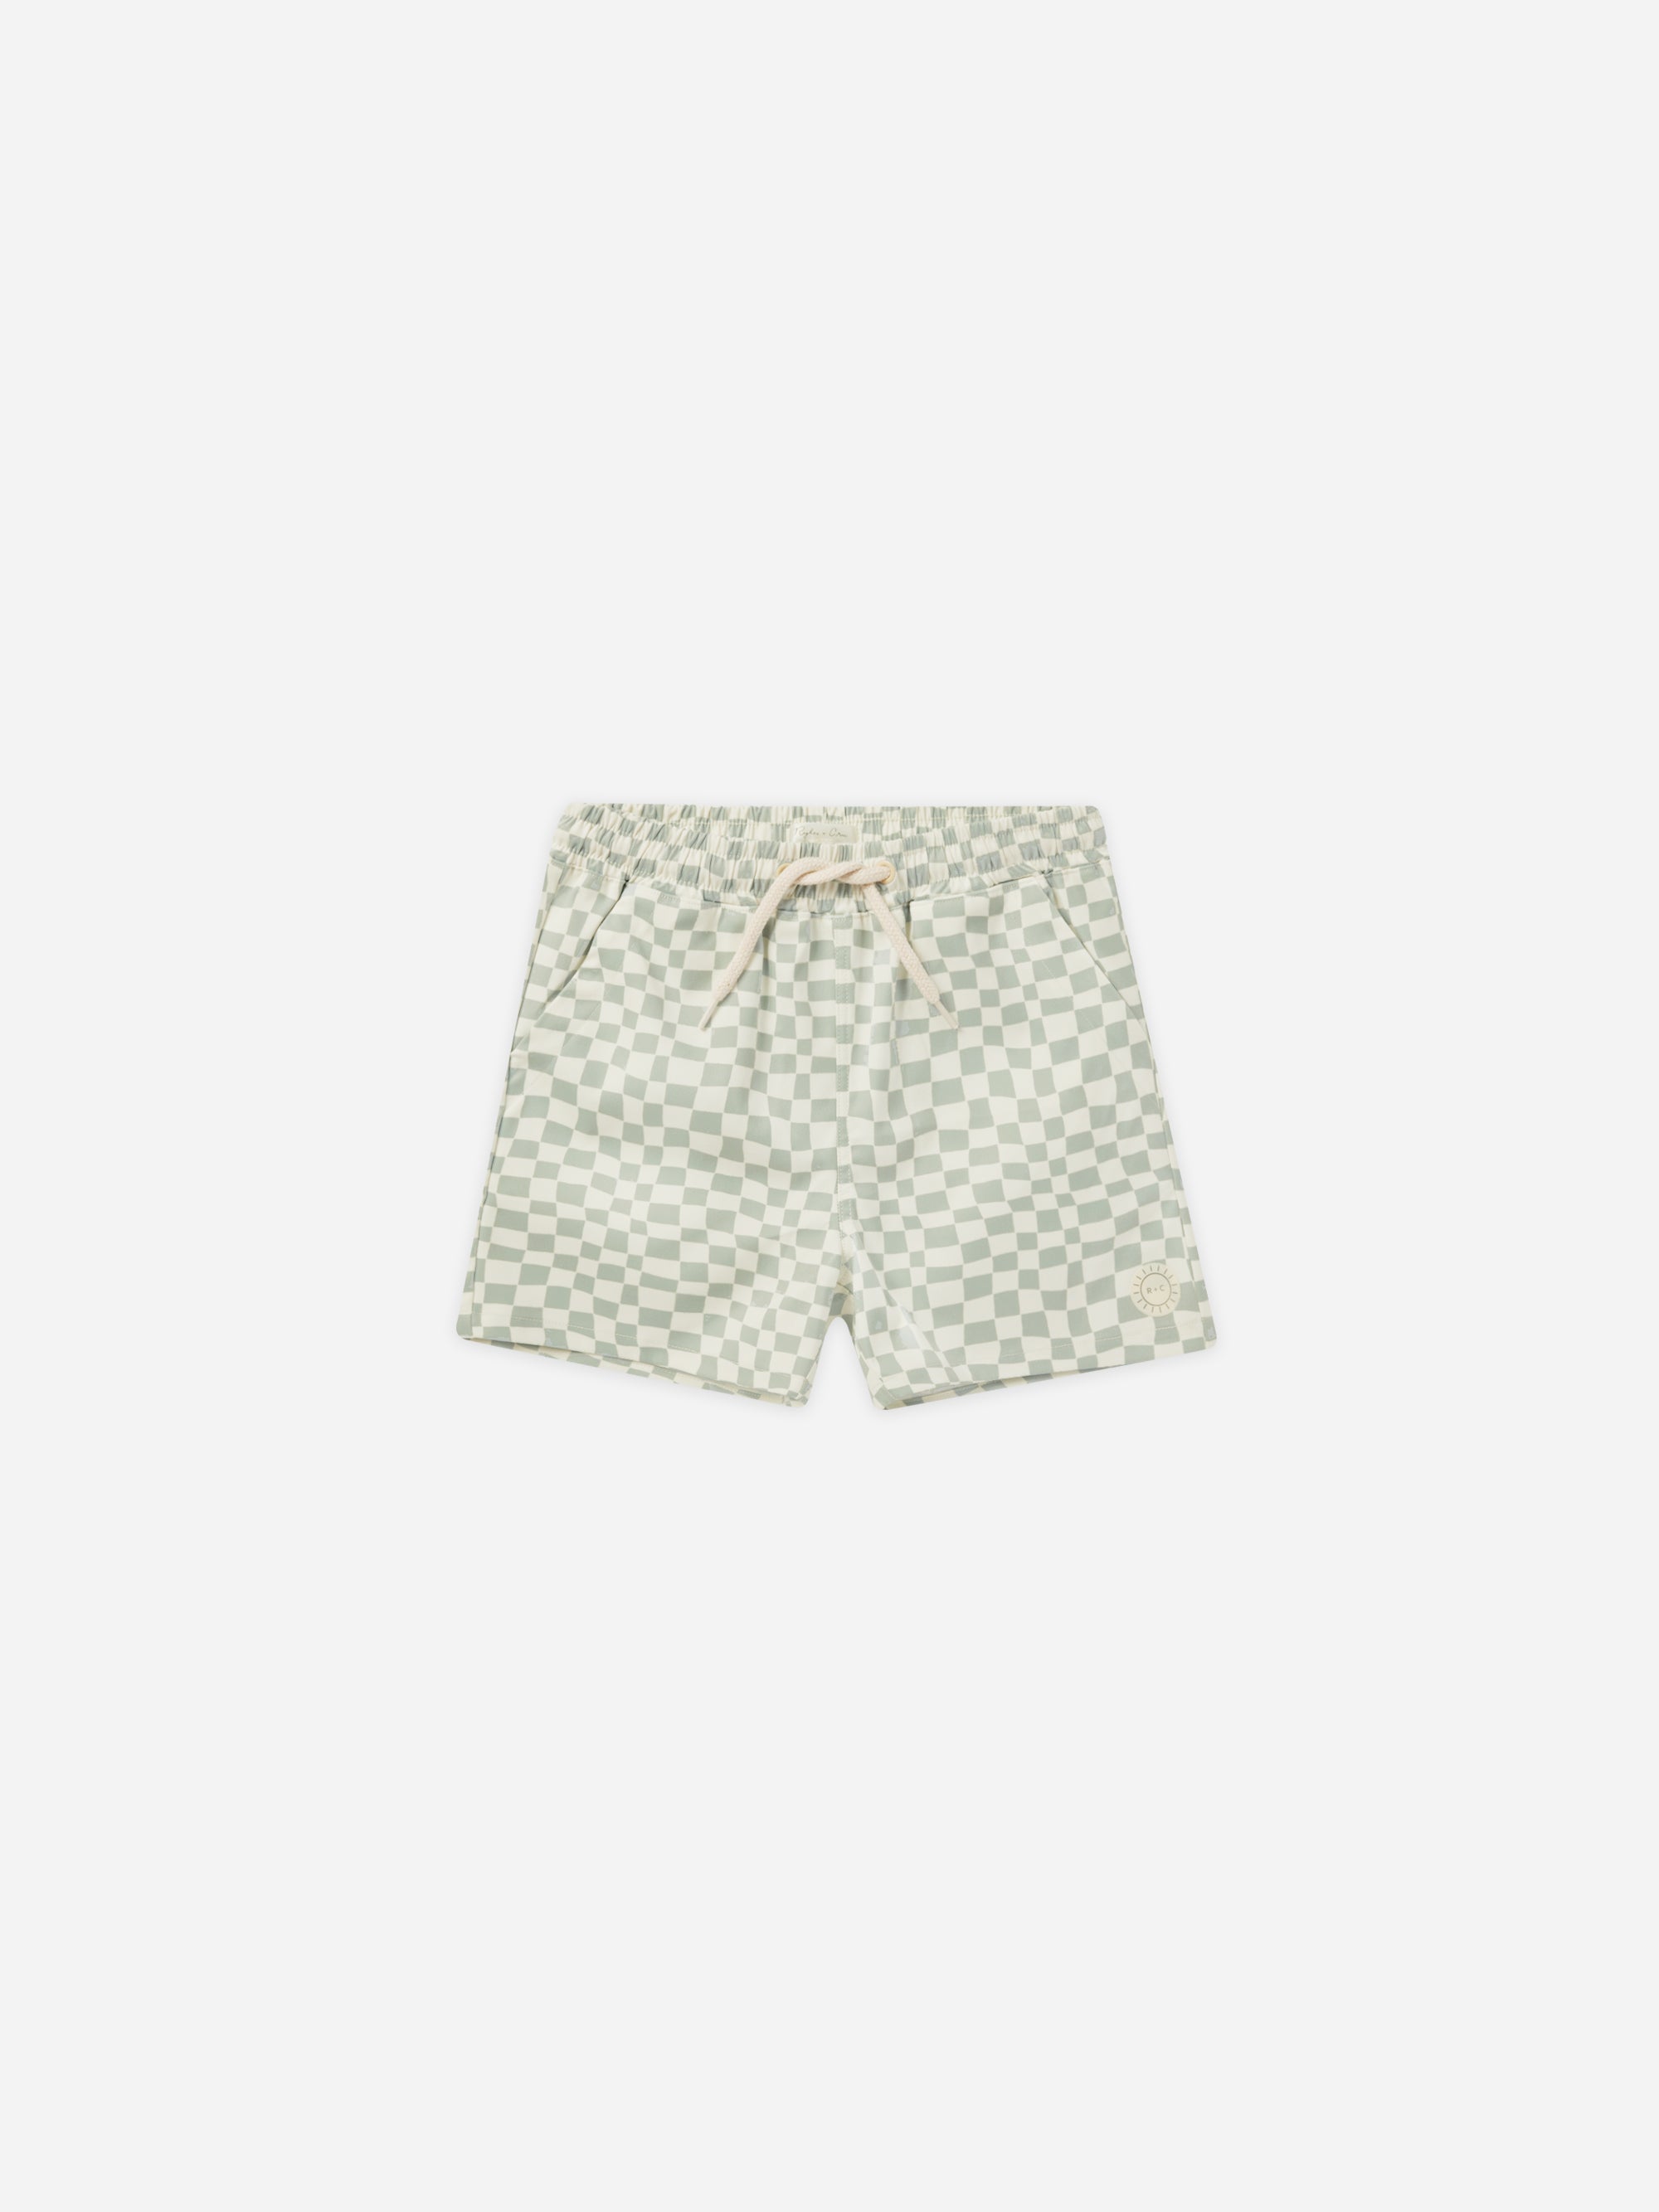 Boardshort || Seafoam Check - Rylee + Cru | Kids Clothes | Trendy Baby Clothes | Modern Infant Outfits |